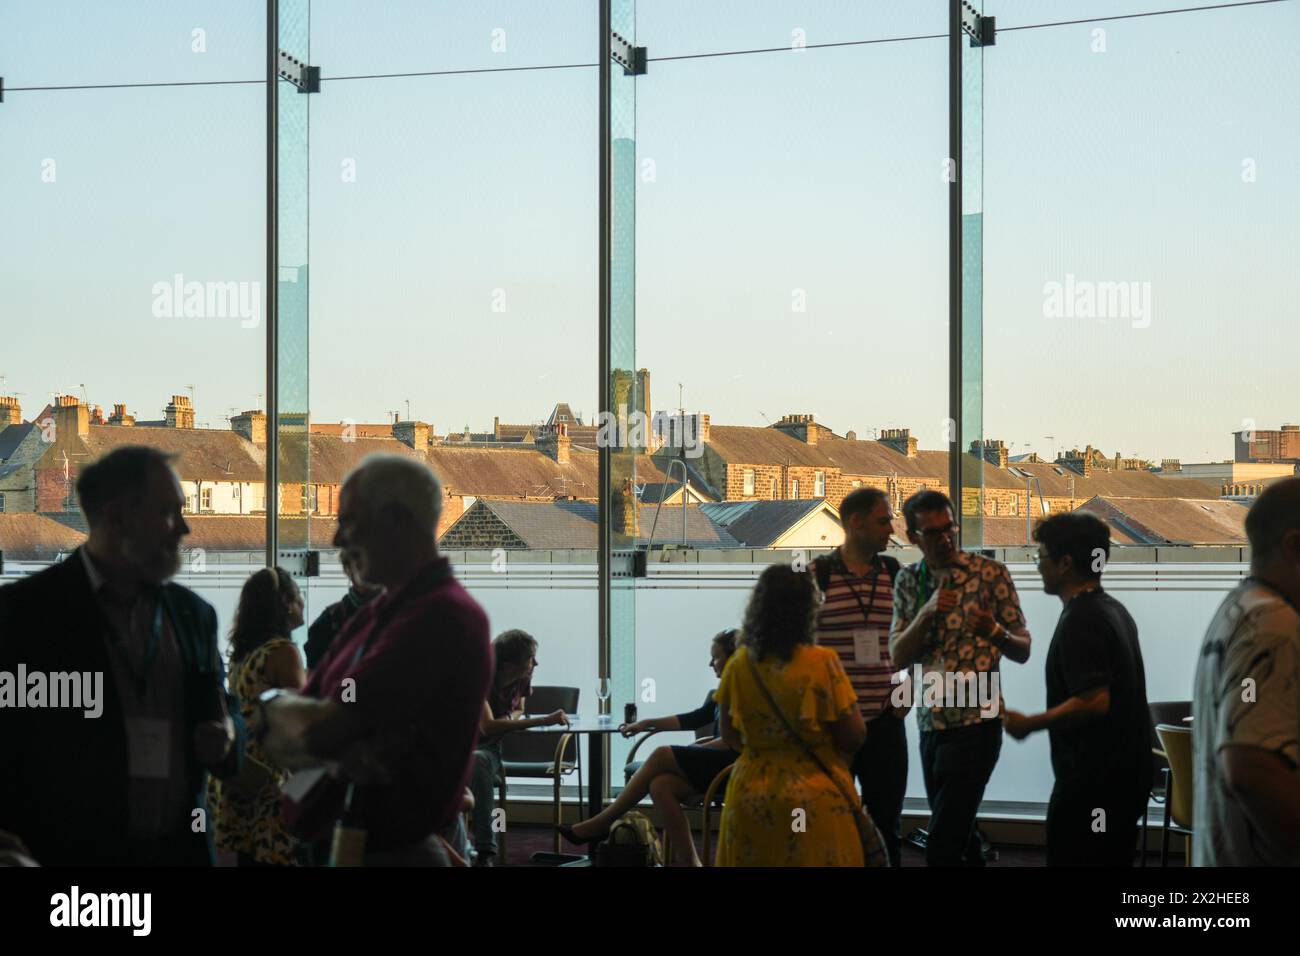 View of houses in Harrogate from inside the convention centre. Photo date: Monday, September 4, 2023. Photo: Richard Gray/Alamy Stock Photo